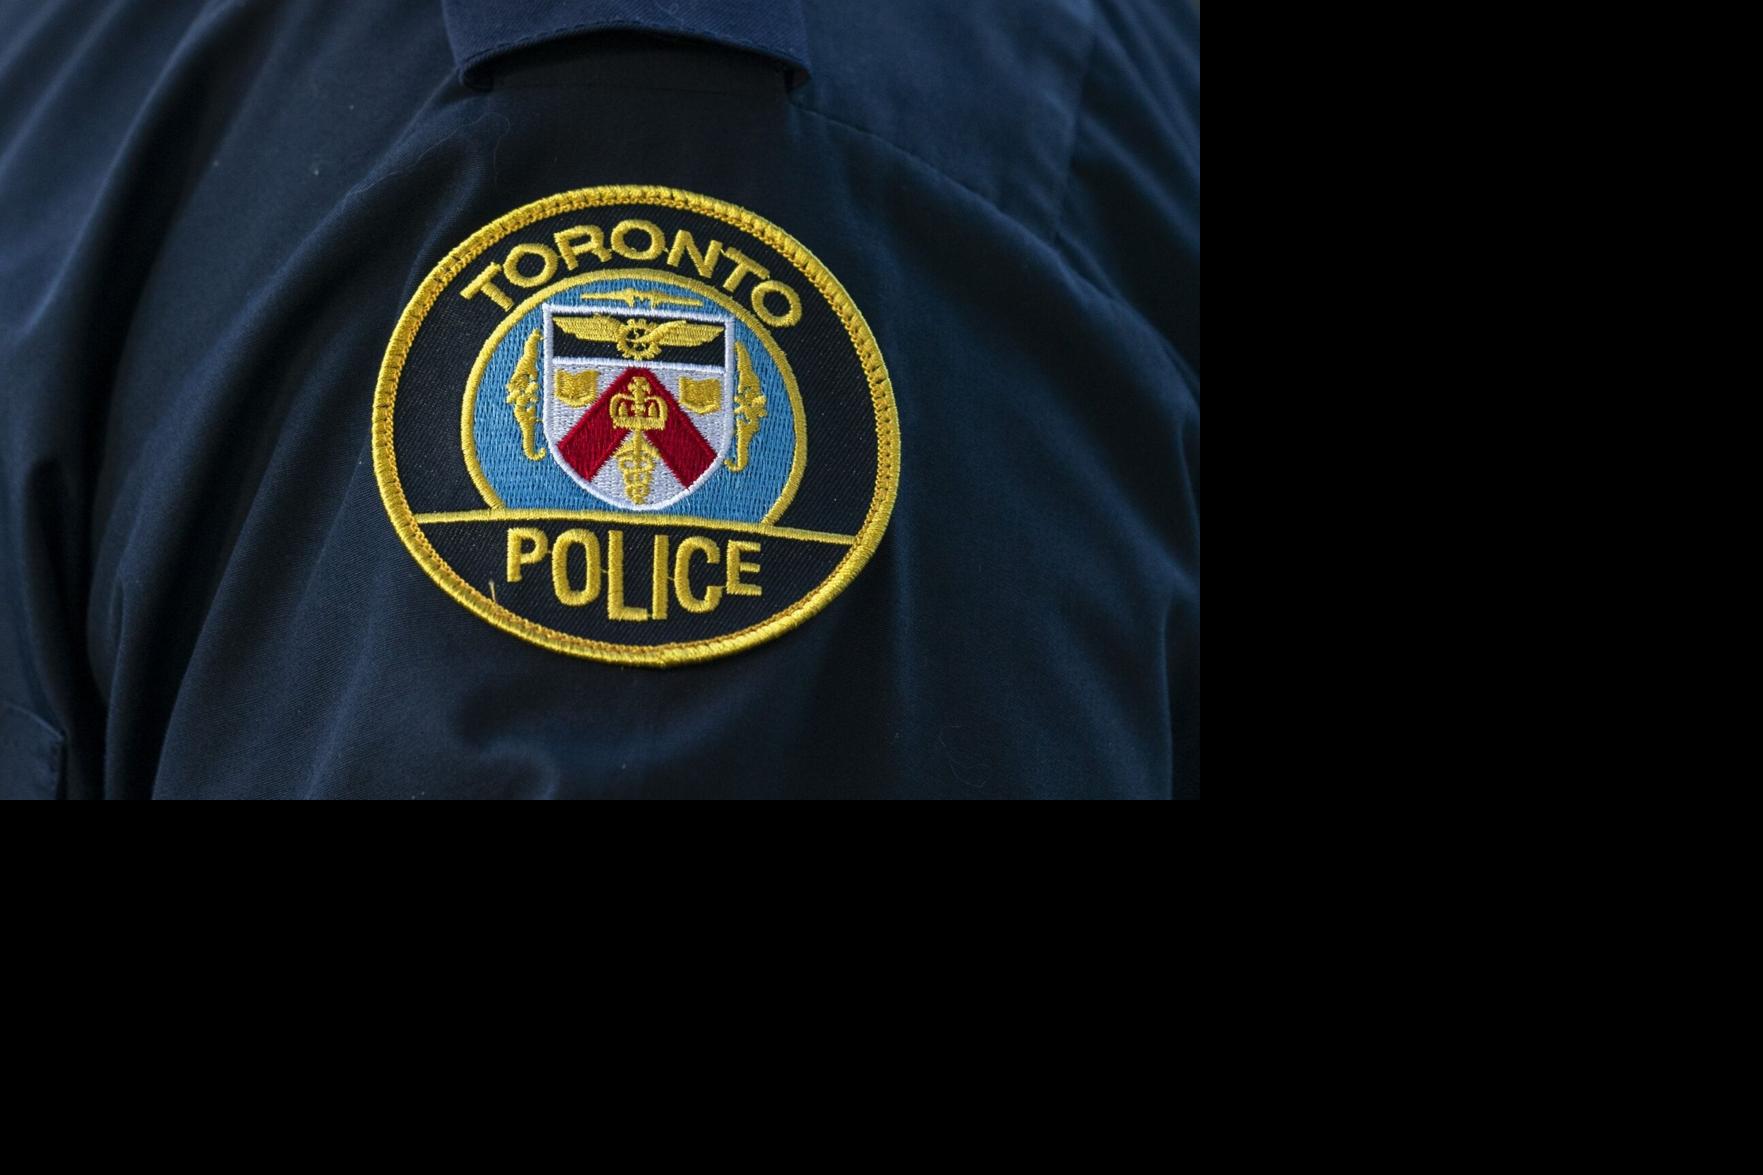 Man arrested for allegedly throwing rock through window of synagogue near Kensington Market